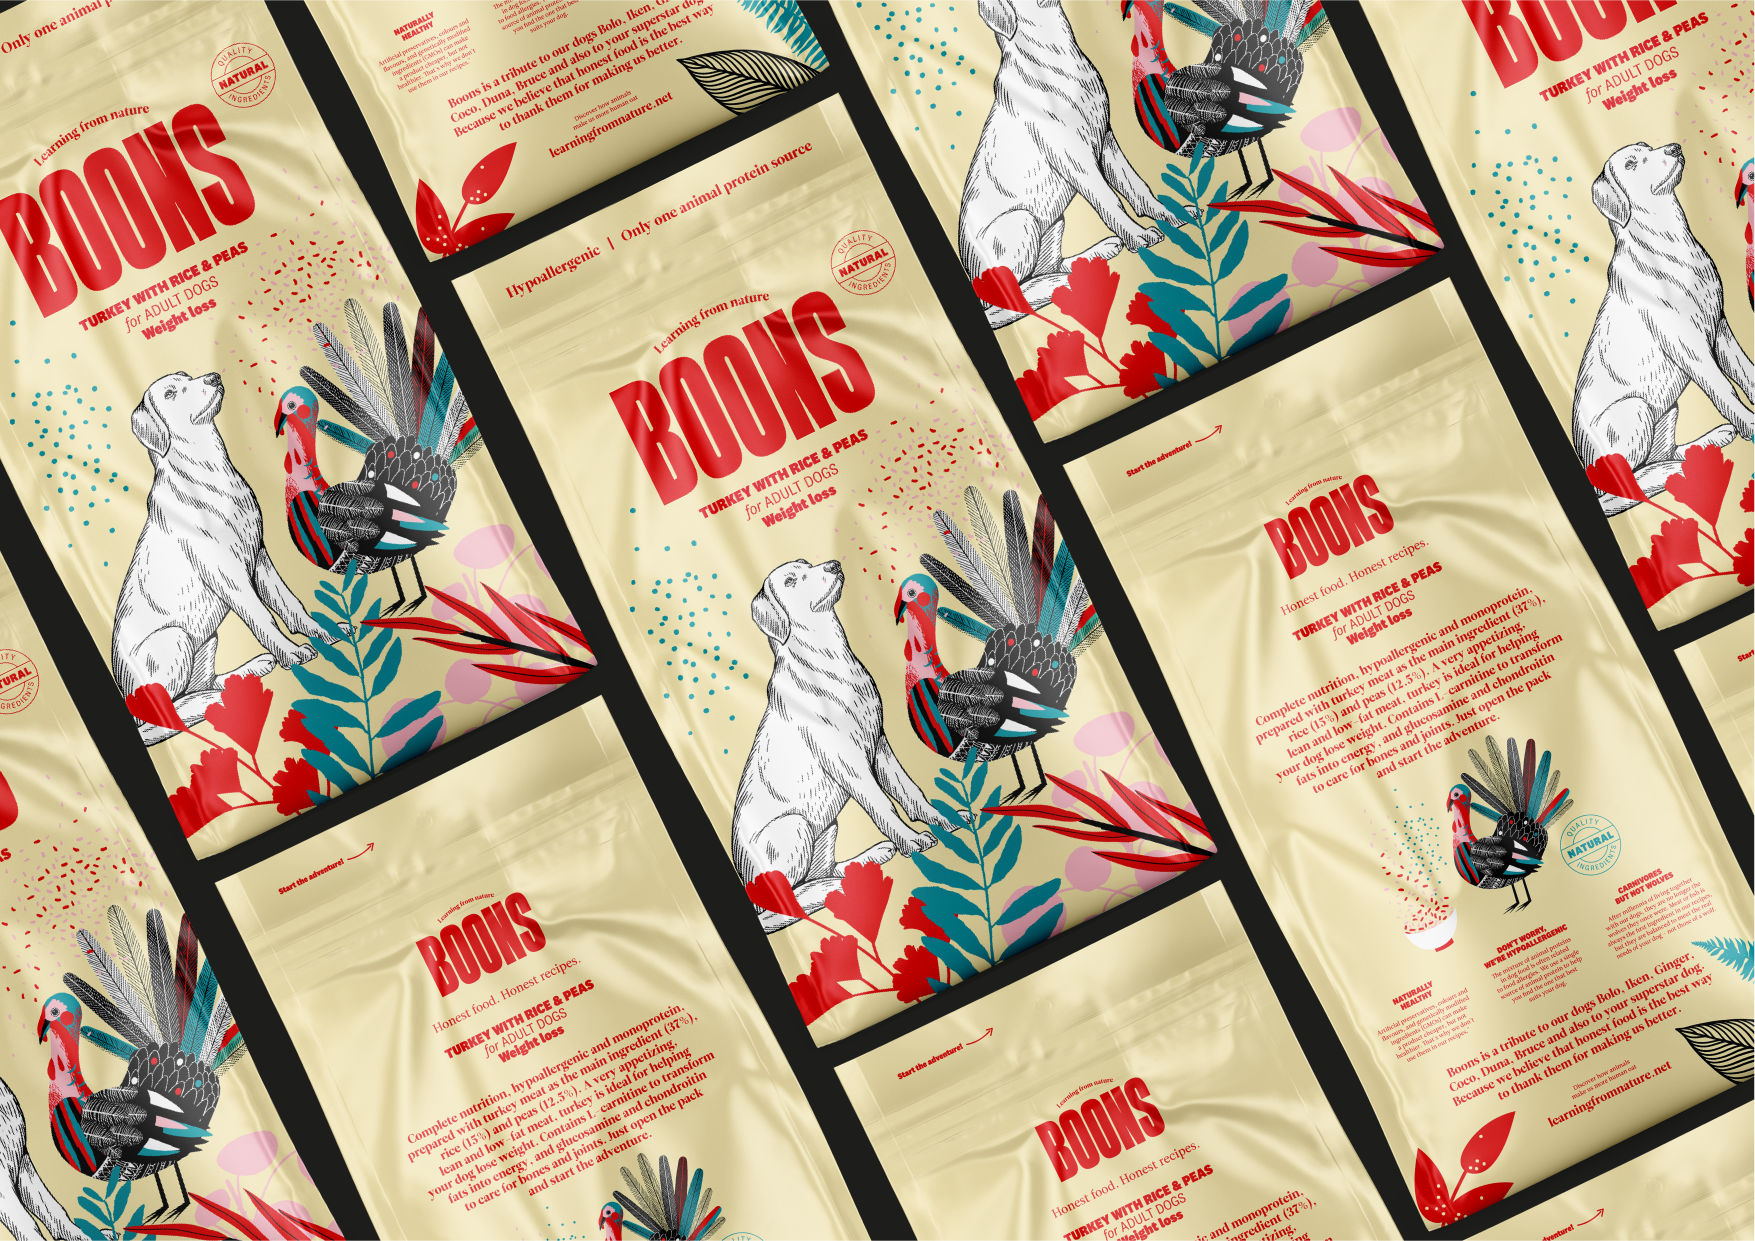 BOONS by BOLD - Creative Work - $i